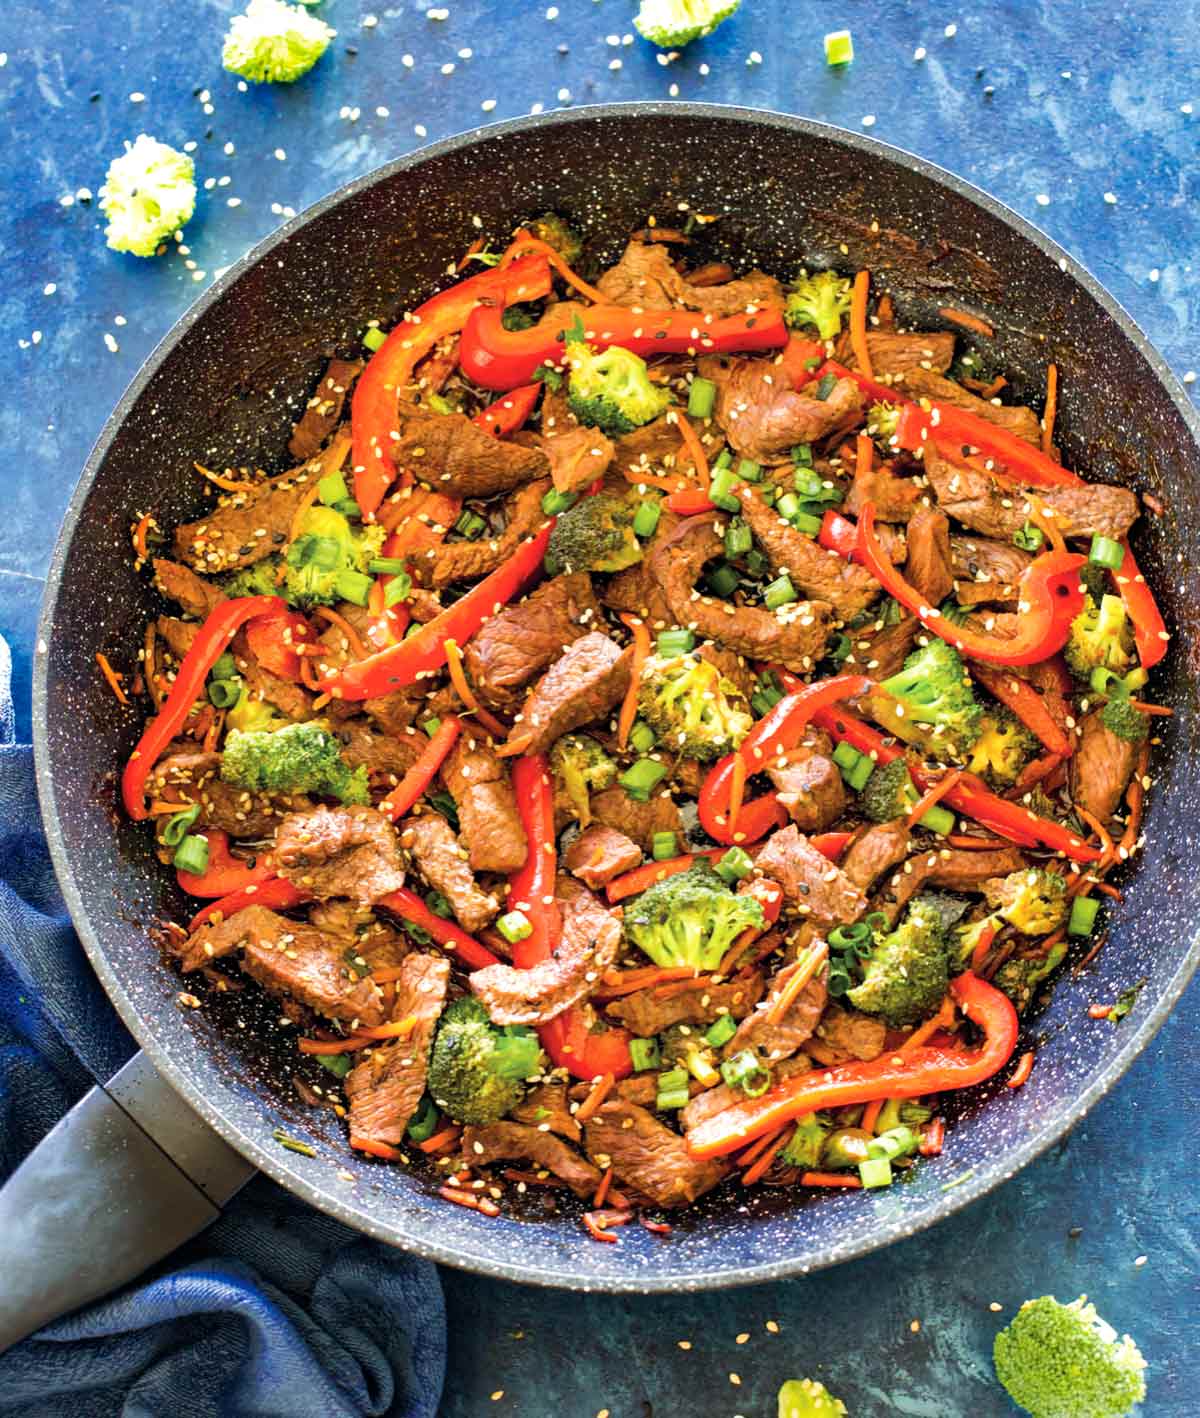 Easy beef stir fry, garnished with scallions and sesame seeds, in a large skillet on a counter.